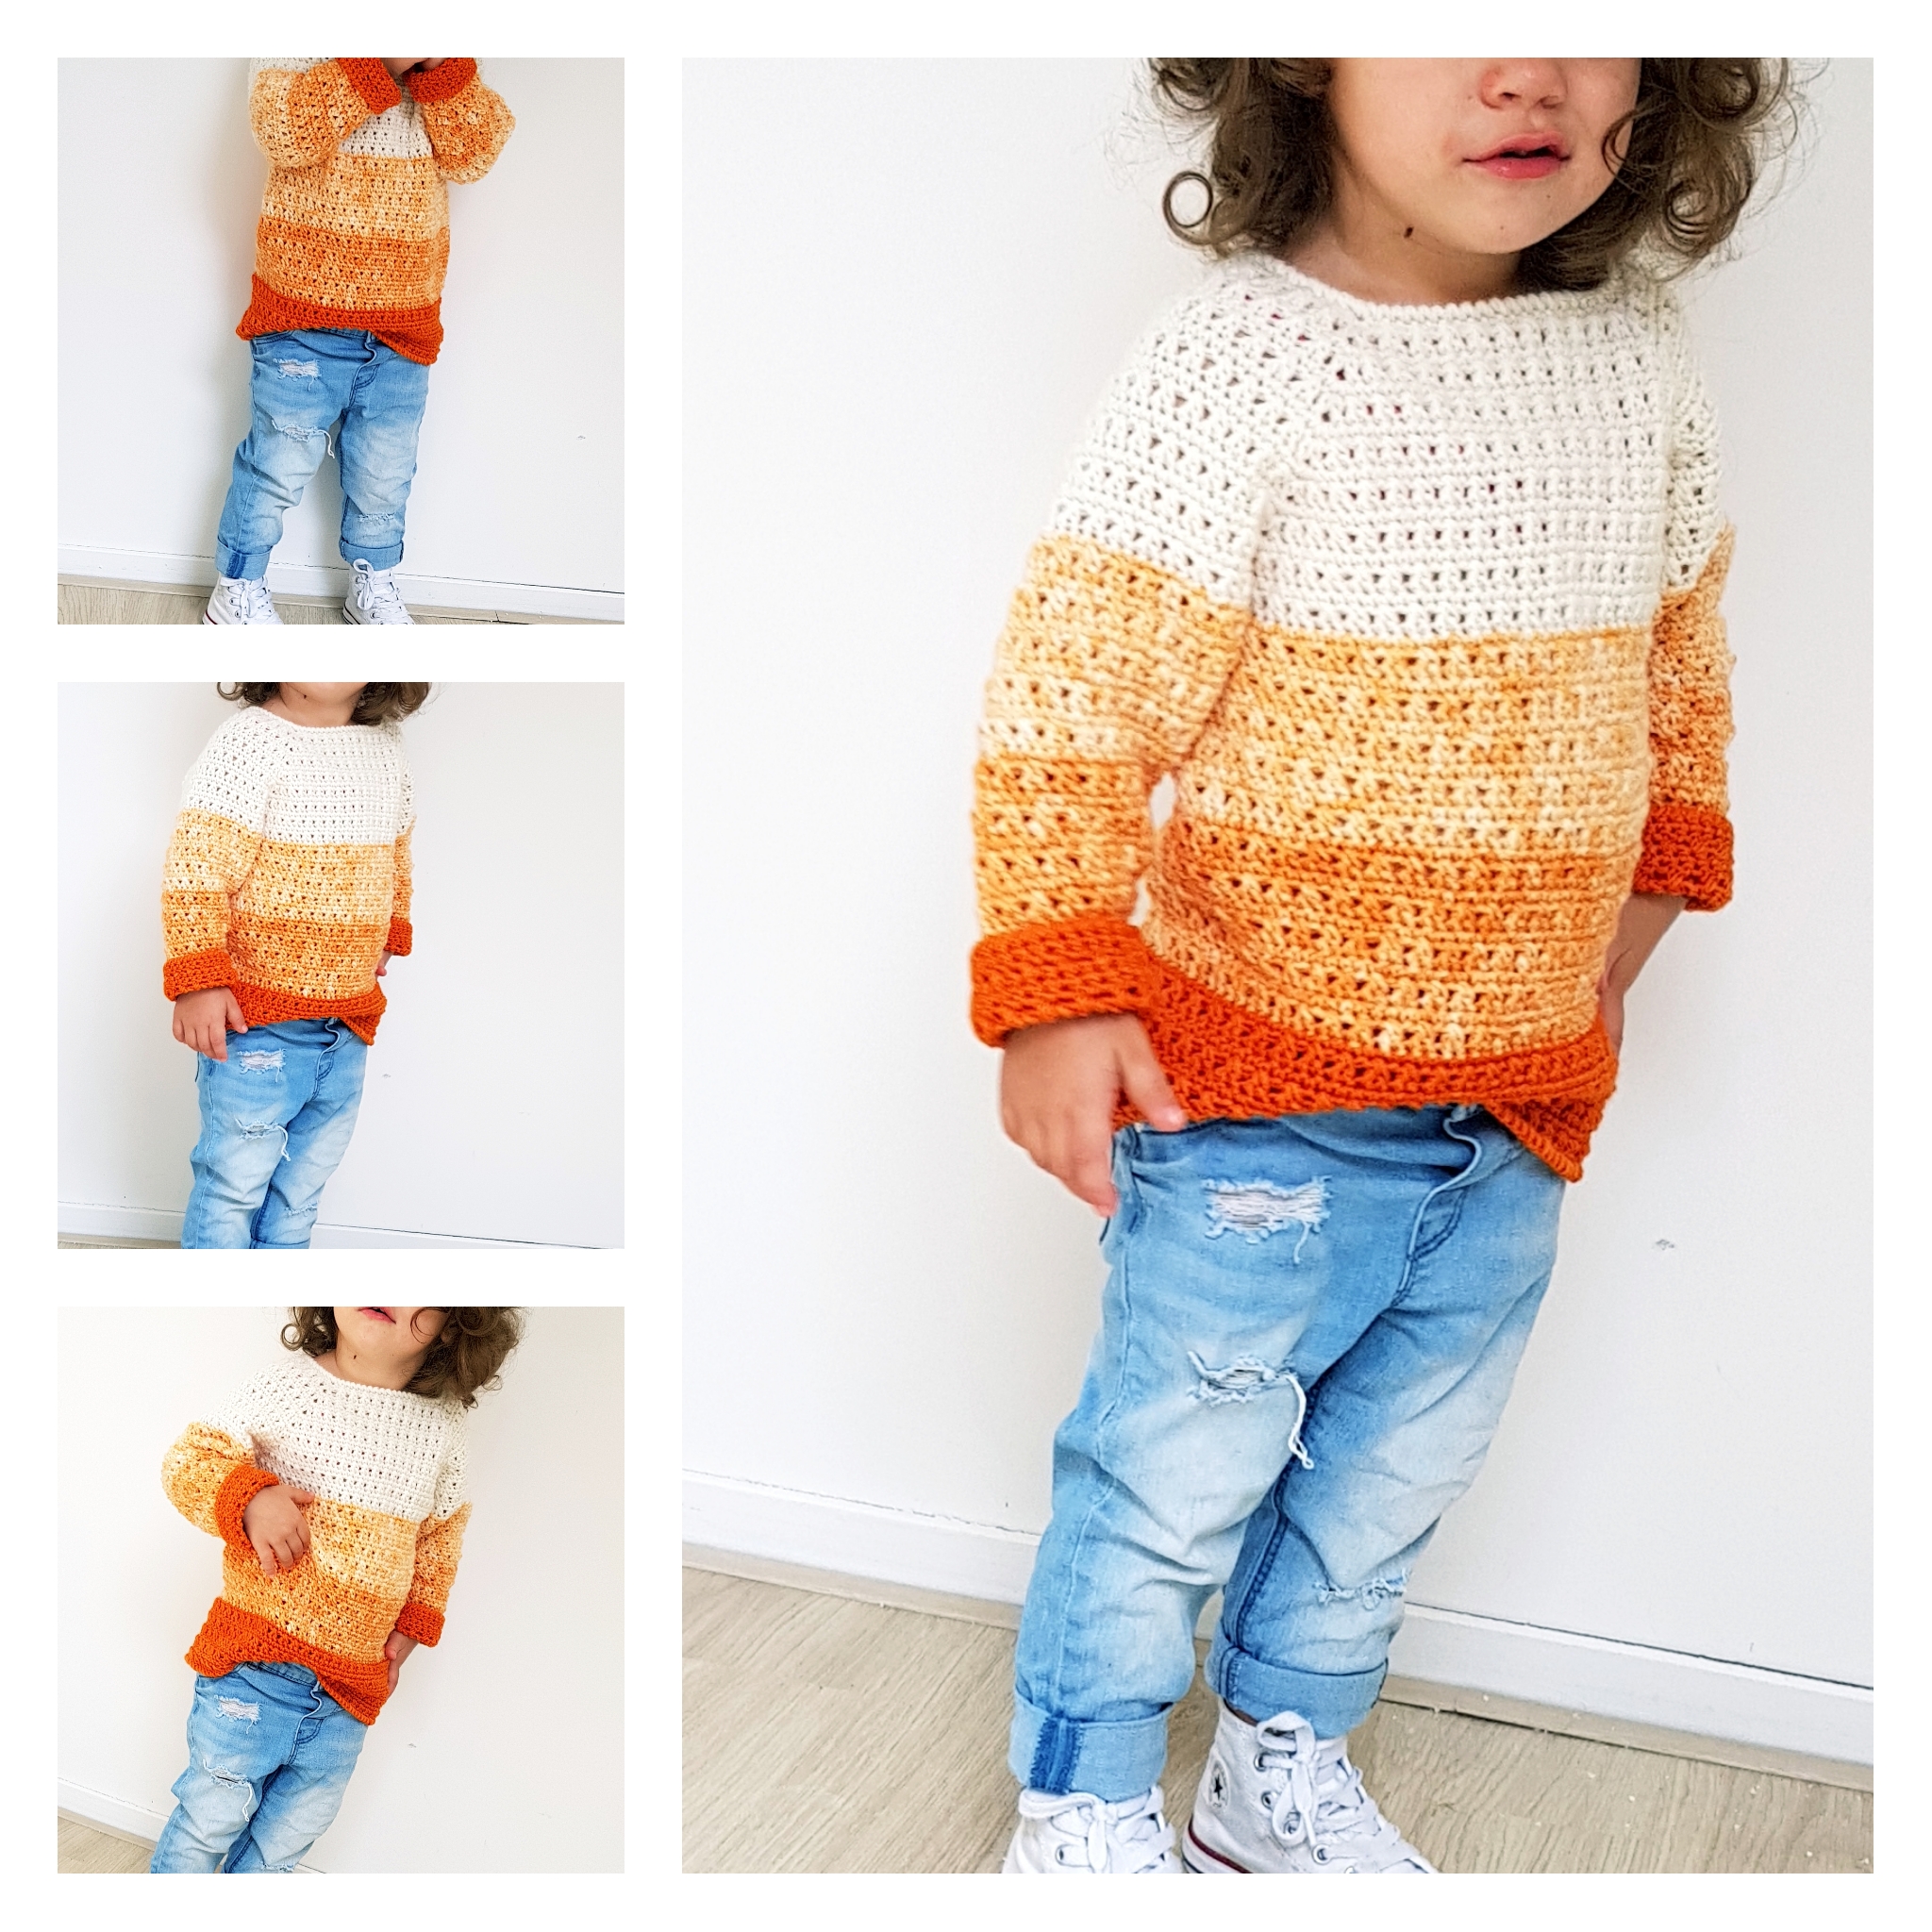 The Pumpkin Sweater Free Pattern and video tutorial